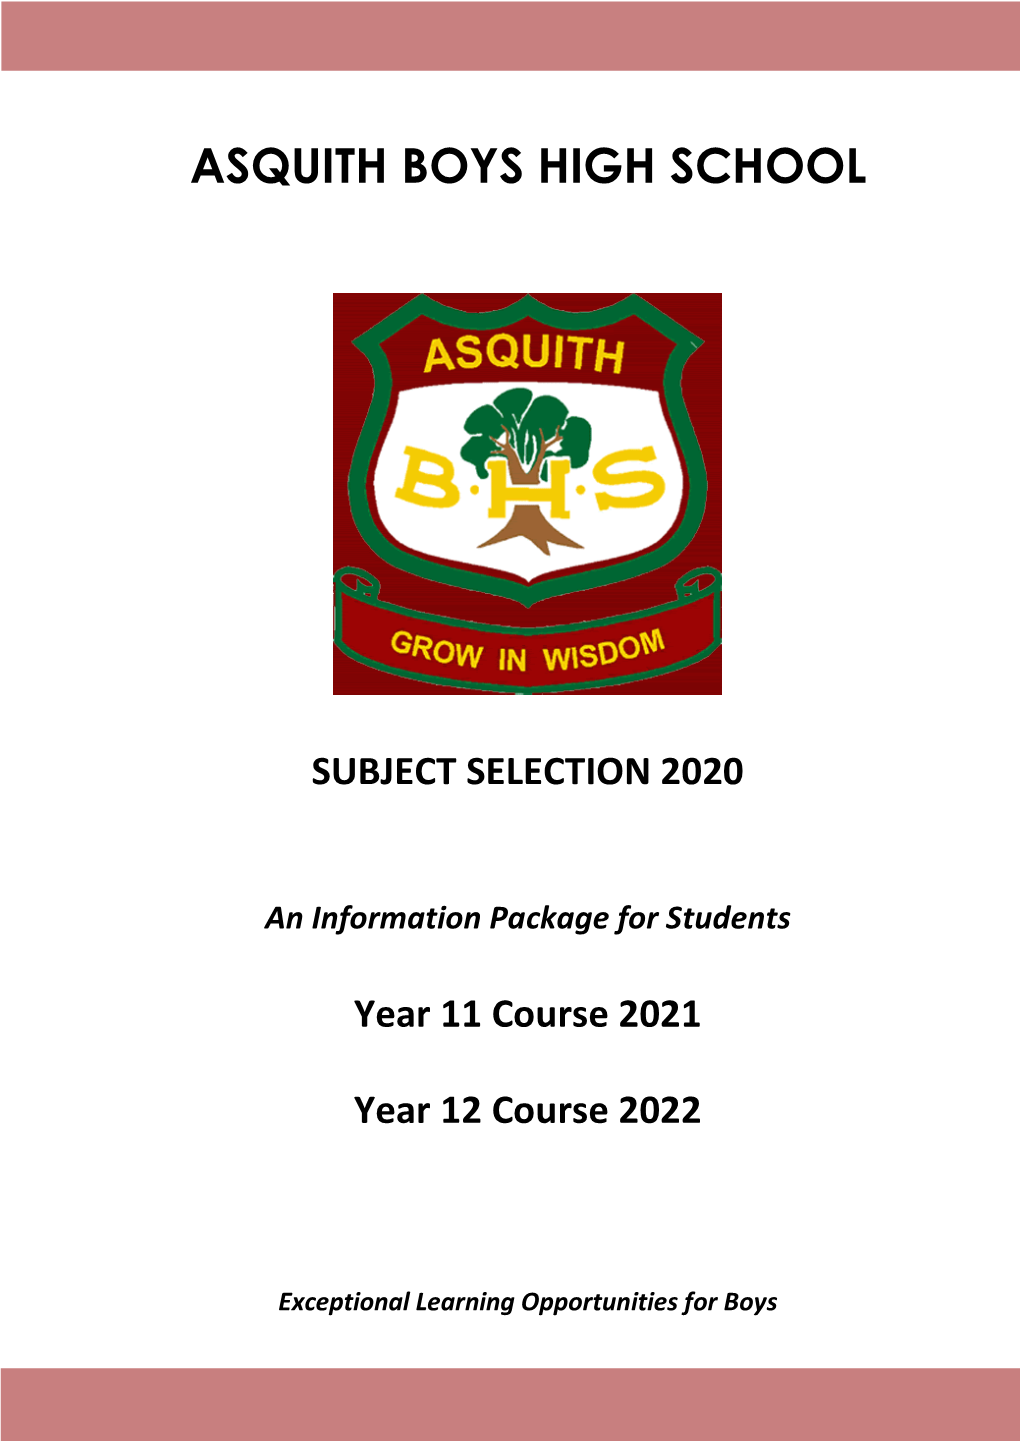 Courses Offered at Asquith Boys High School 2021